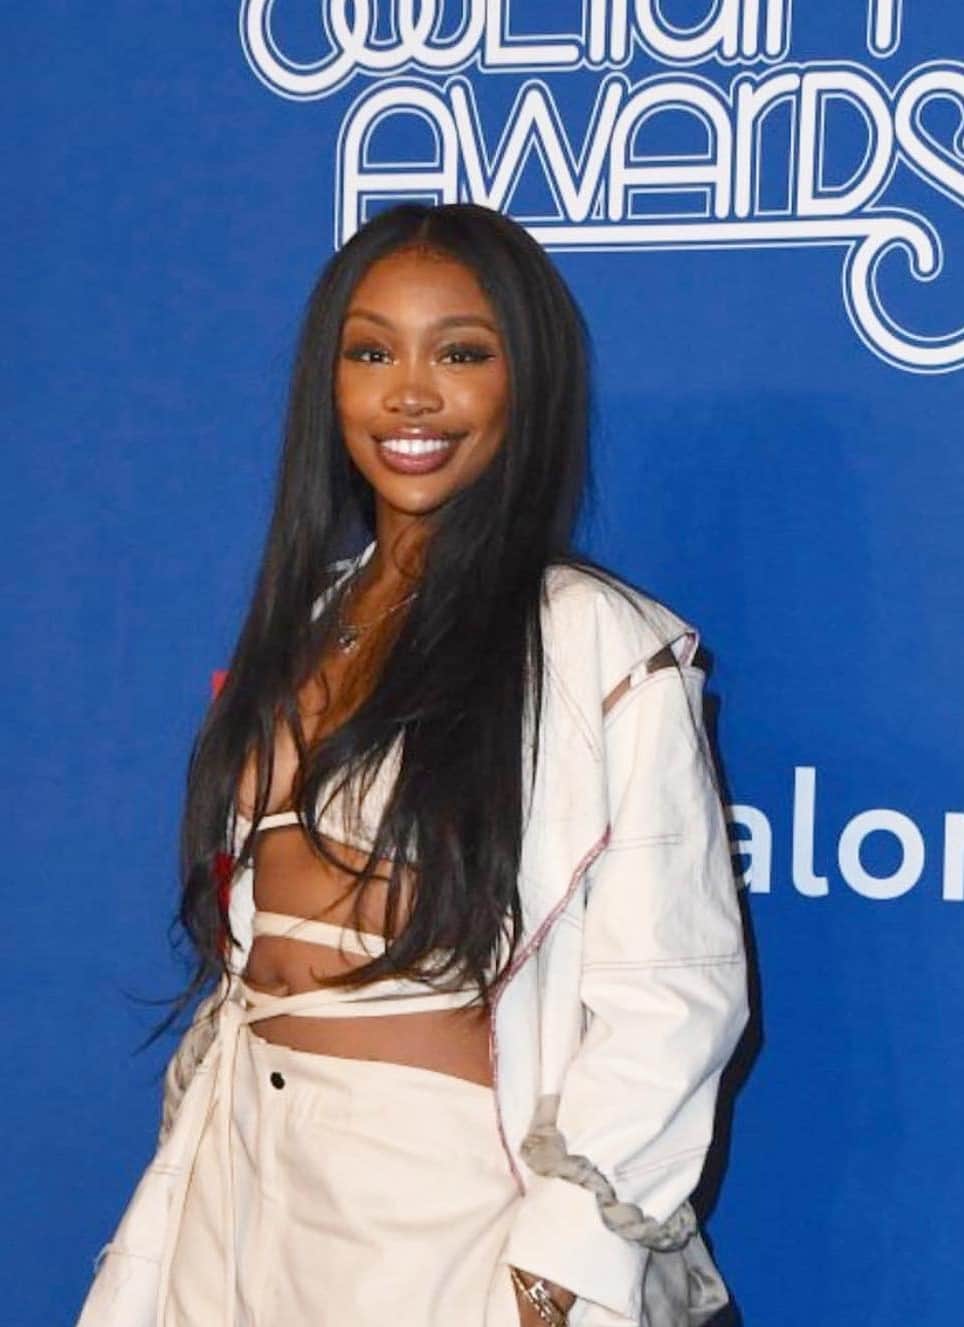 SZA - Biography, Profile, Facts, and Career